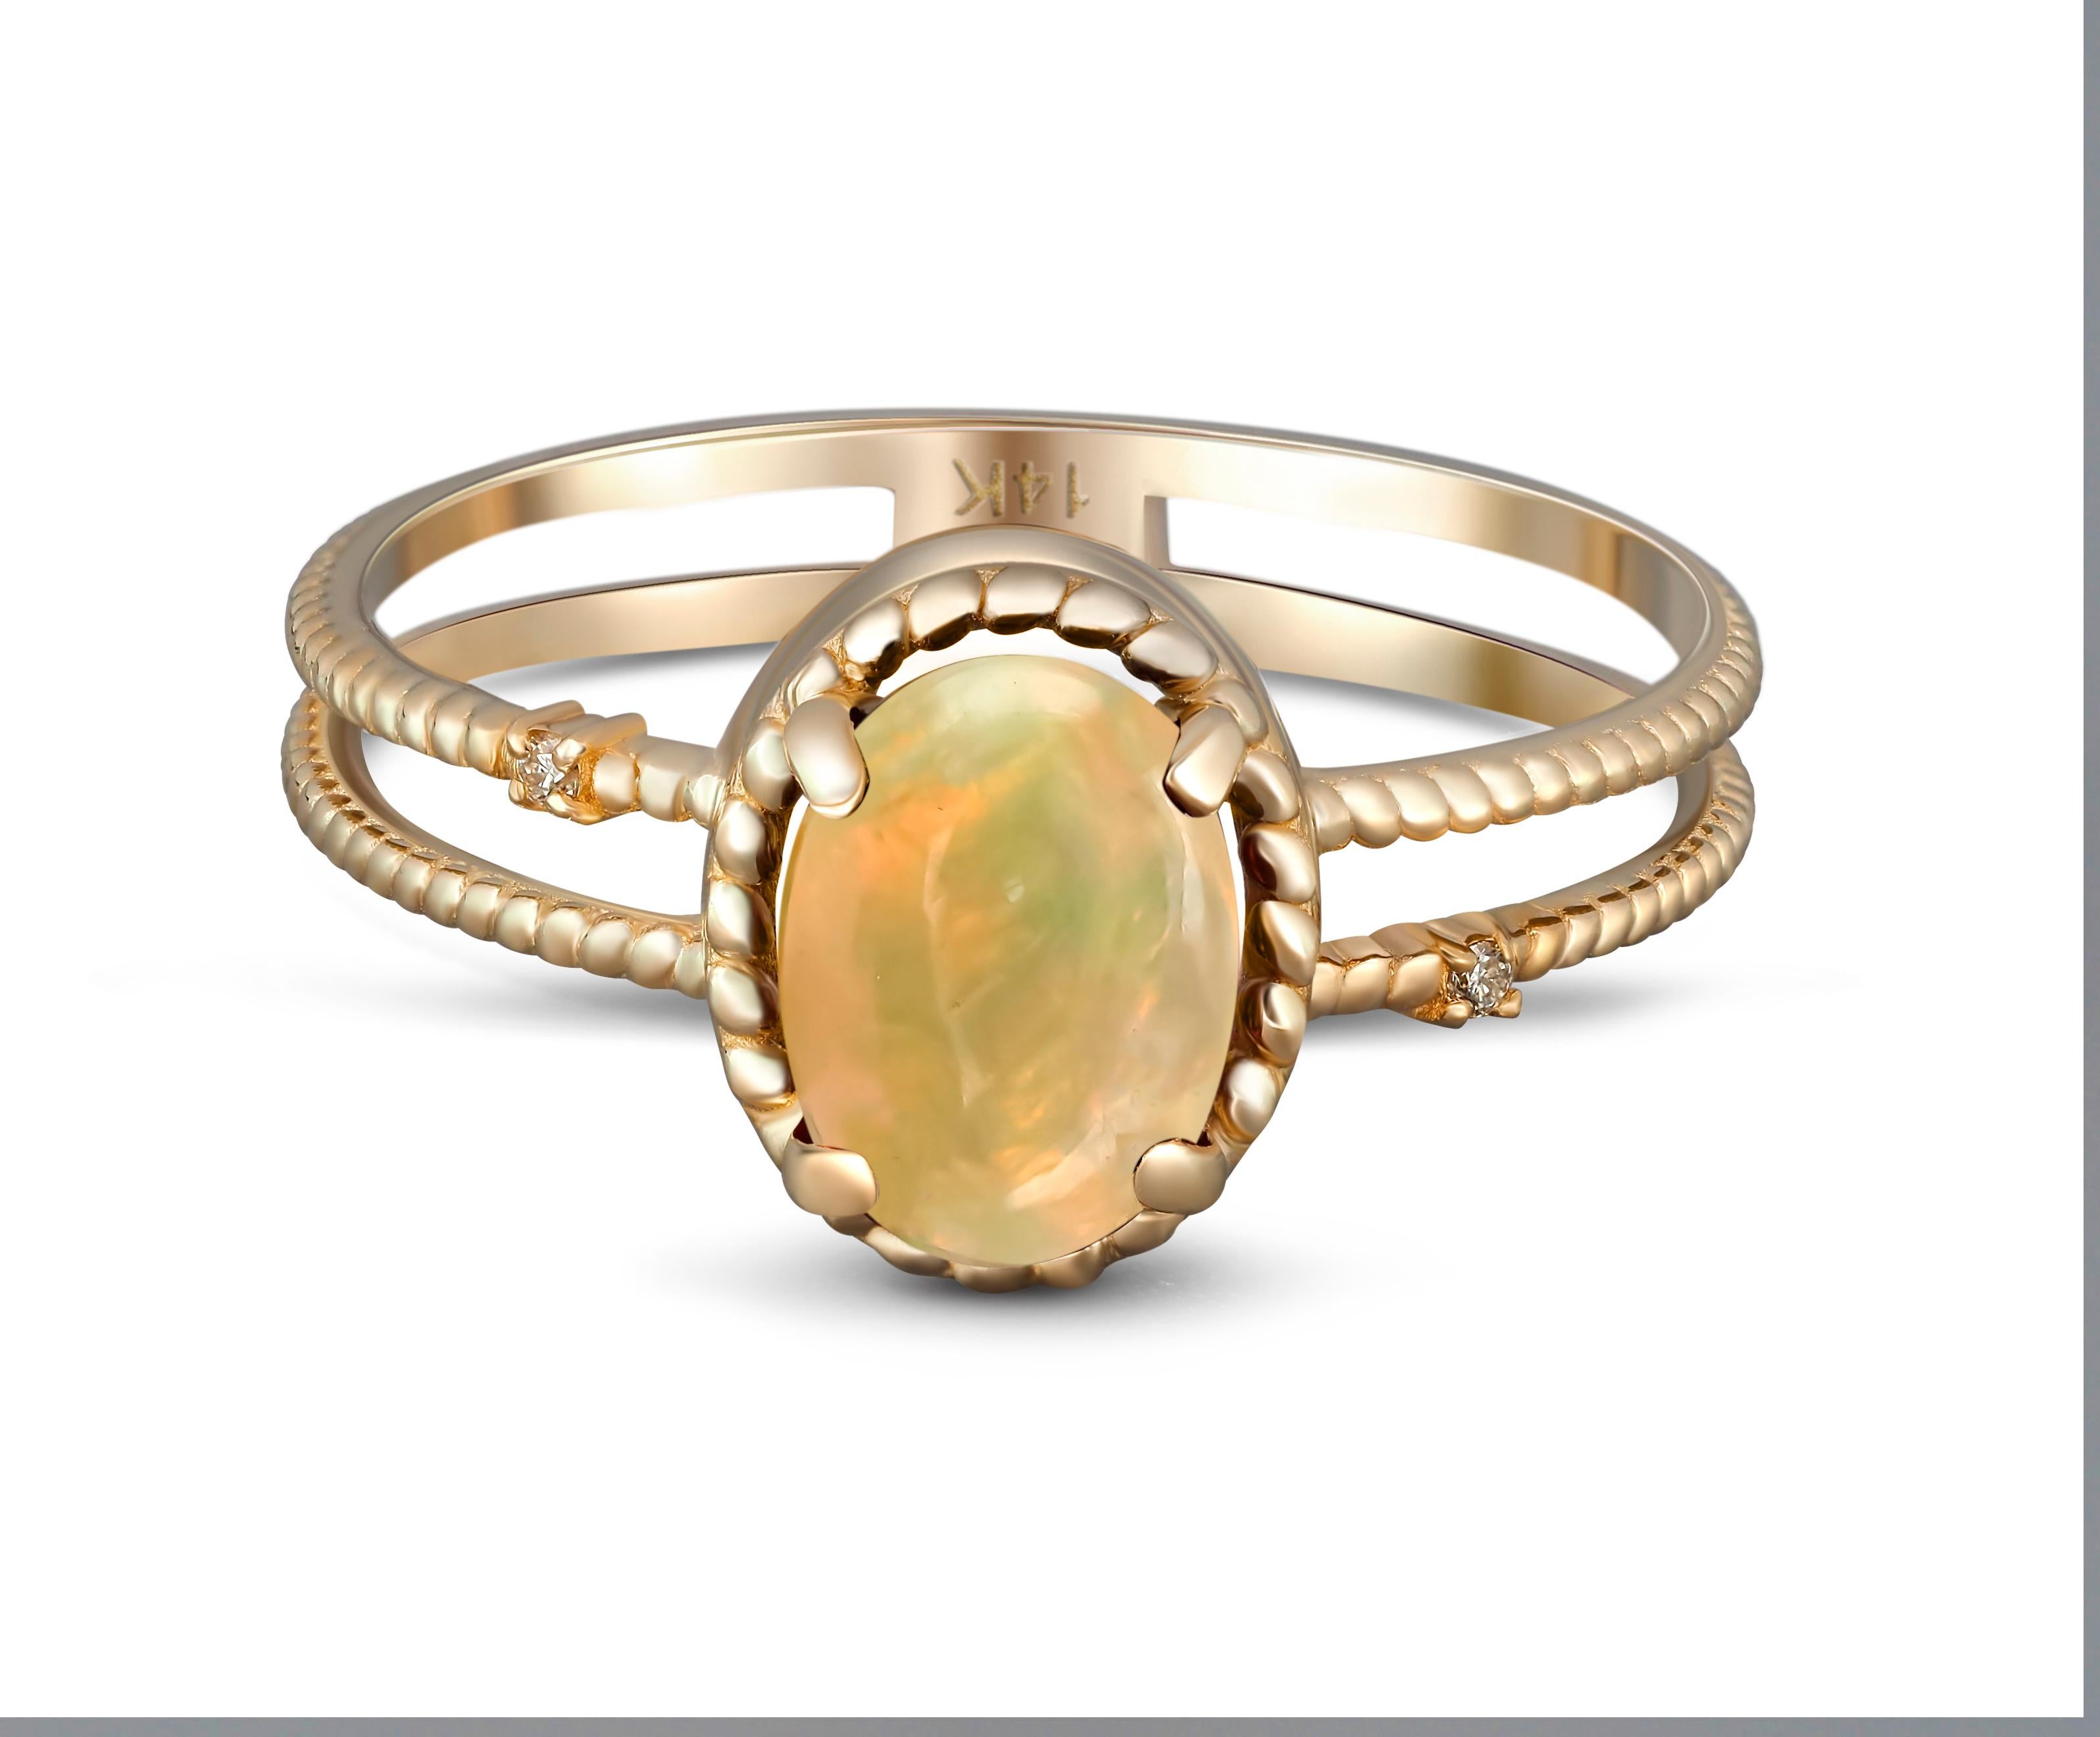 For Sale:  Cabochon Opal Ring. 14k Gold Ring with Opal. Minimalist Opal Ring 2